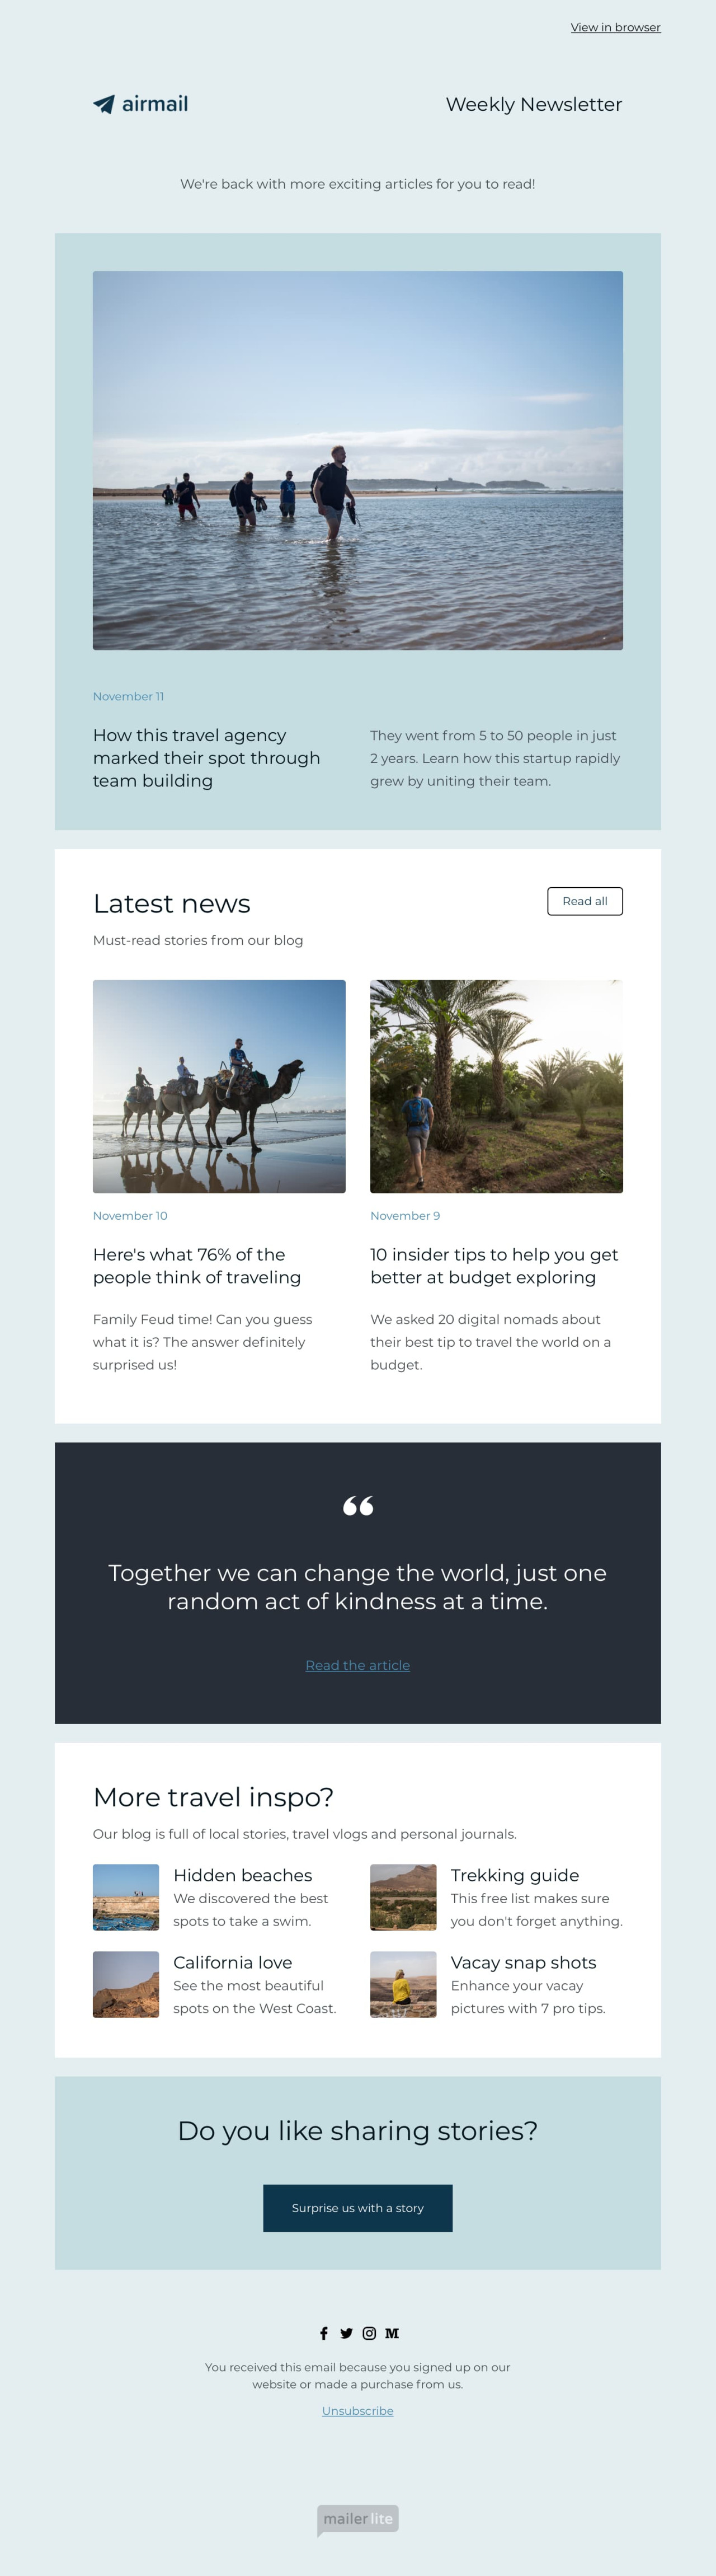 Content heavy newsletter template - Made by MailerLite